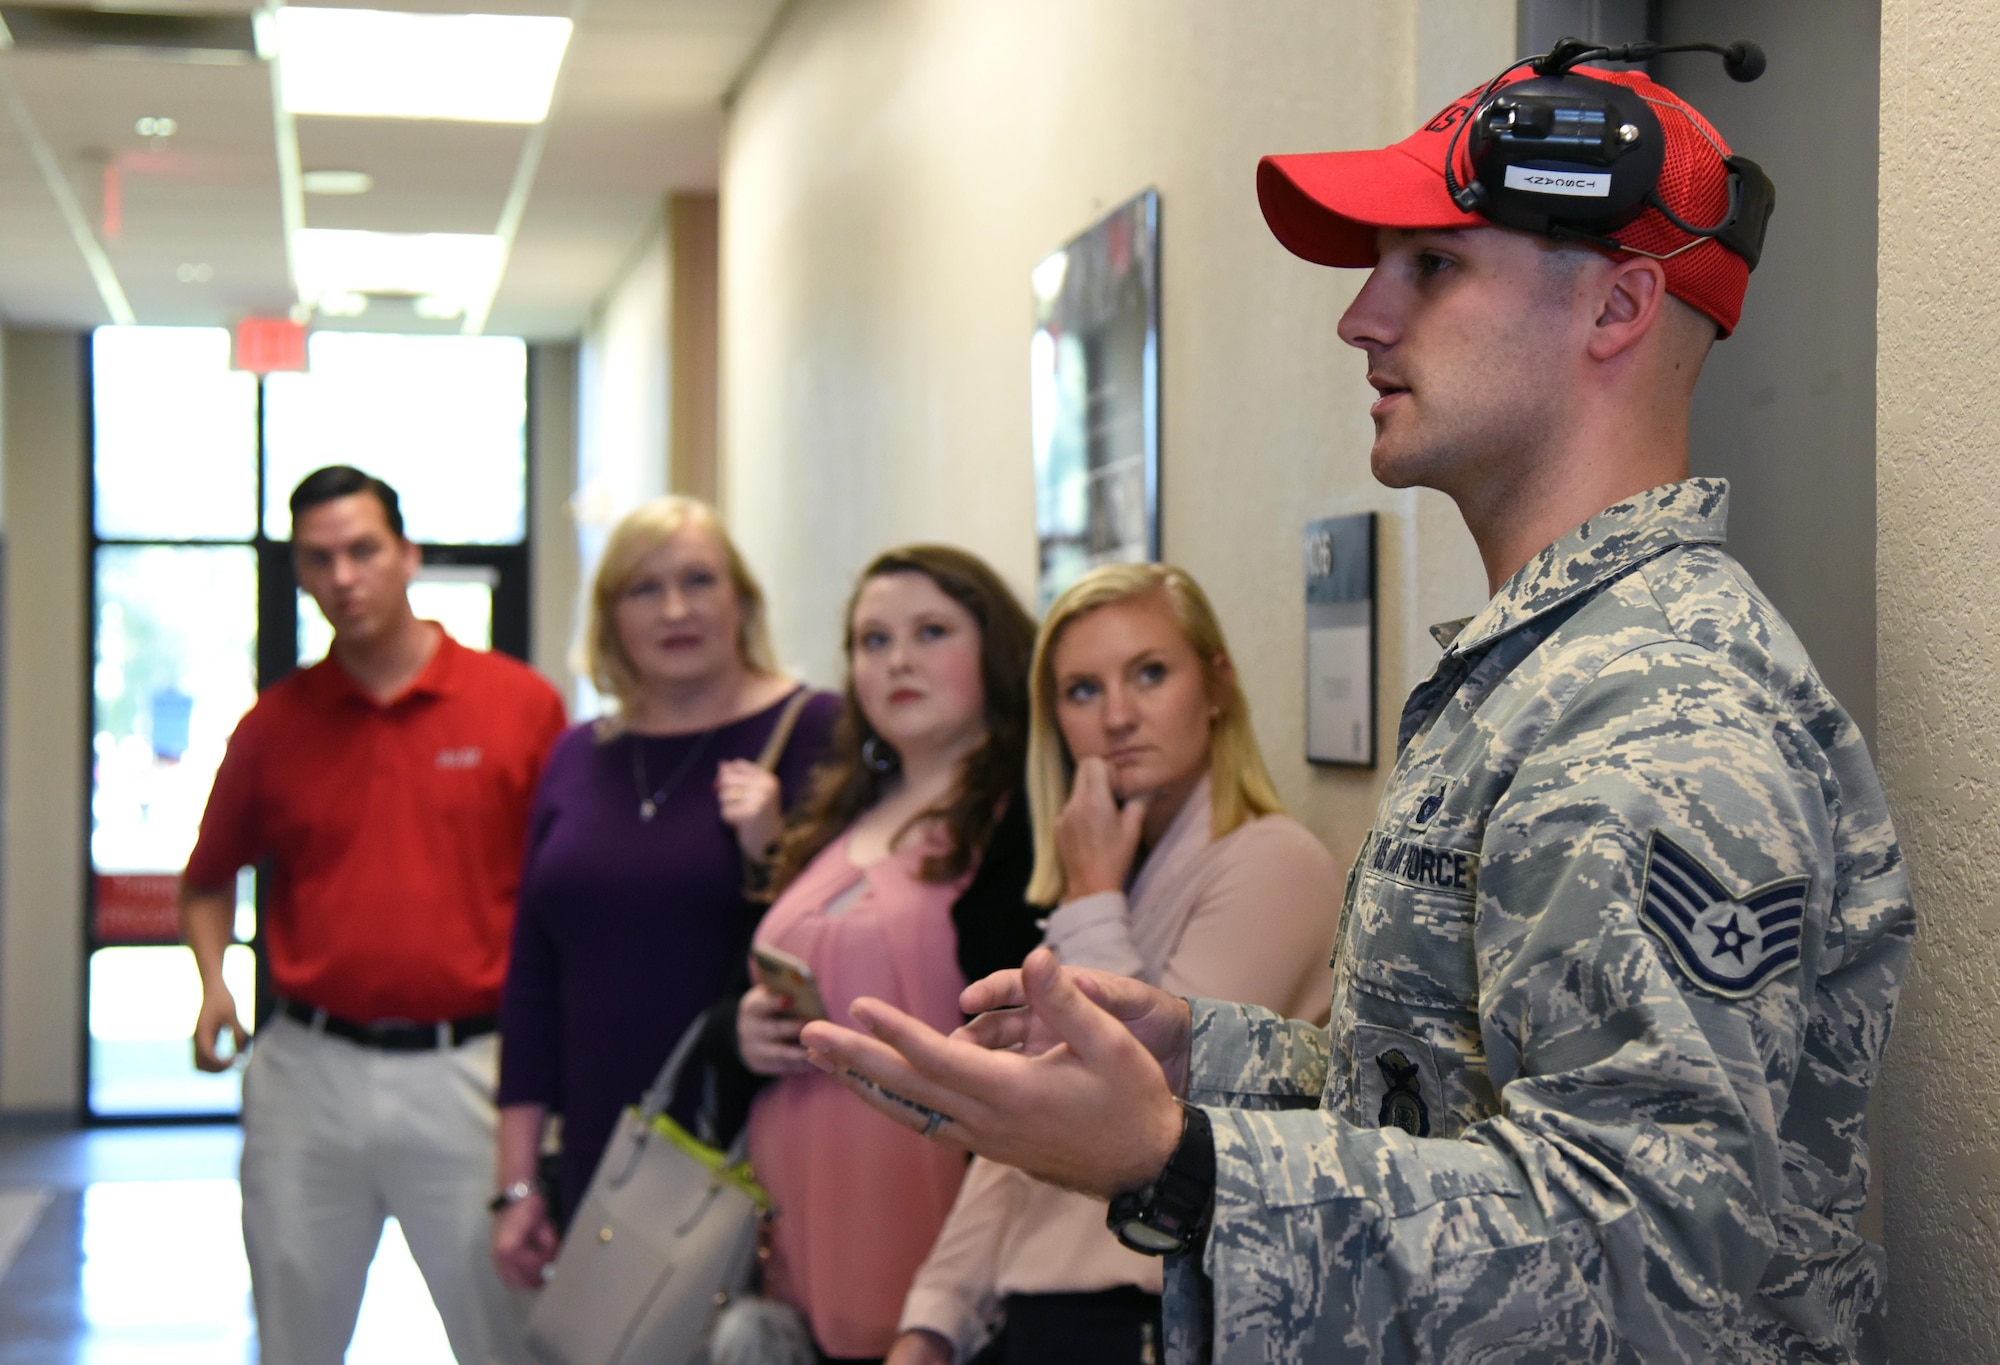 Staff Sgt. Jeffrey Tuscany, 81st Security Forces Squadron combat arms NCO in charge, briefs reporters from local media outlets during a tour the 81st SFS indoor firing range during Media Day Oct. 26, 2017, on Keesler Air Force Base, Mississippi. In order to better understand Keesler’s mission, the reporters also toured the air traffic control tower, the Keesler Medical Center and a 333rd Training Squadron cyber training course. (U.S. Air Force photo by Kemberly Groue)